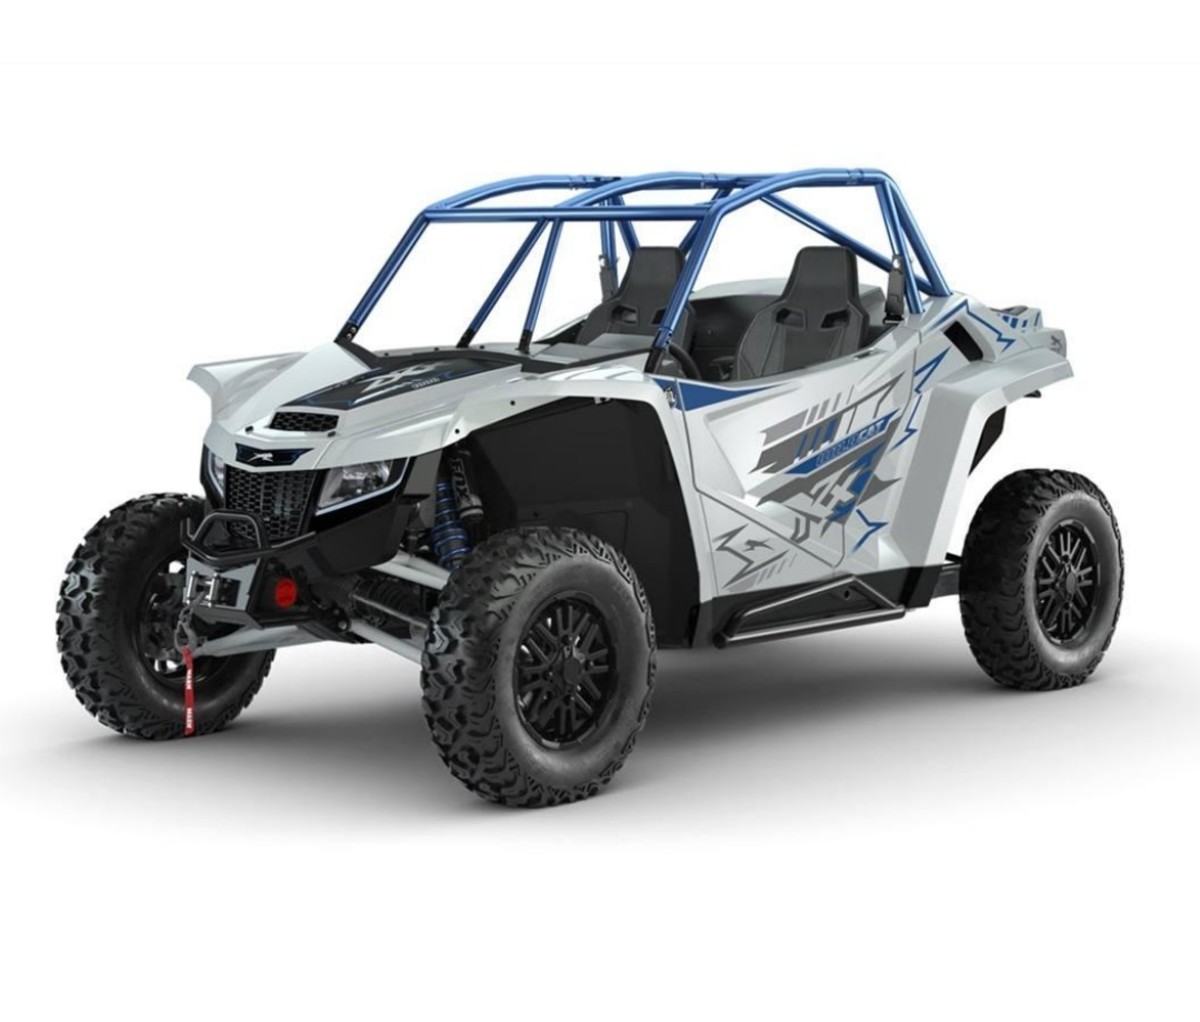 Arctic Cat Wildcat XX SE in white and blue on a white background. side-by-side UTVs